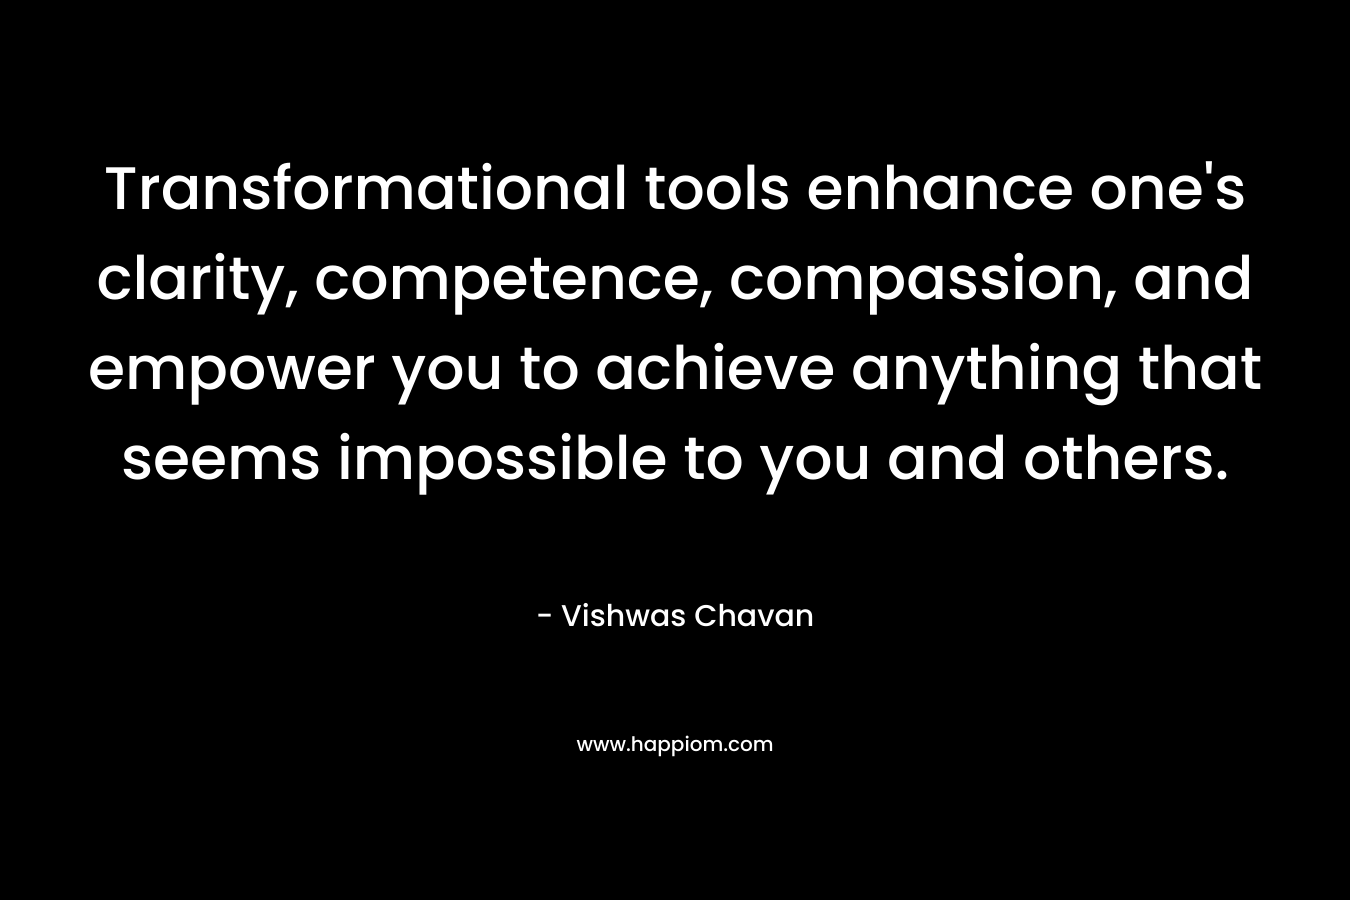 Transformational tools enhance one's clarity, competence, compassion, and empower you to achieve anything that seems impossible to you and others.